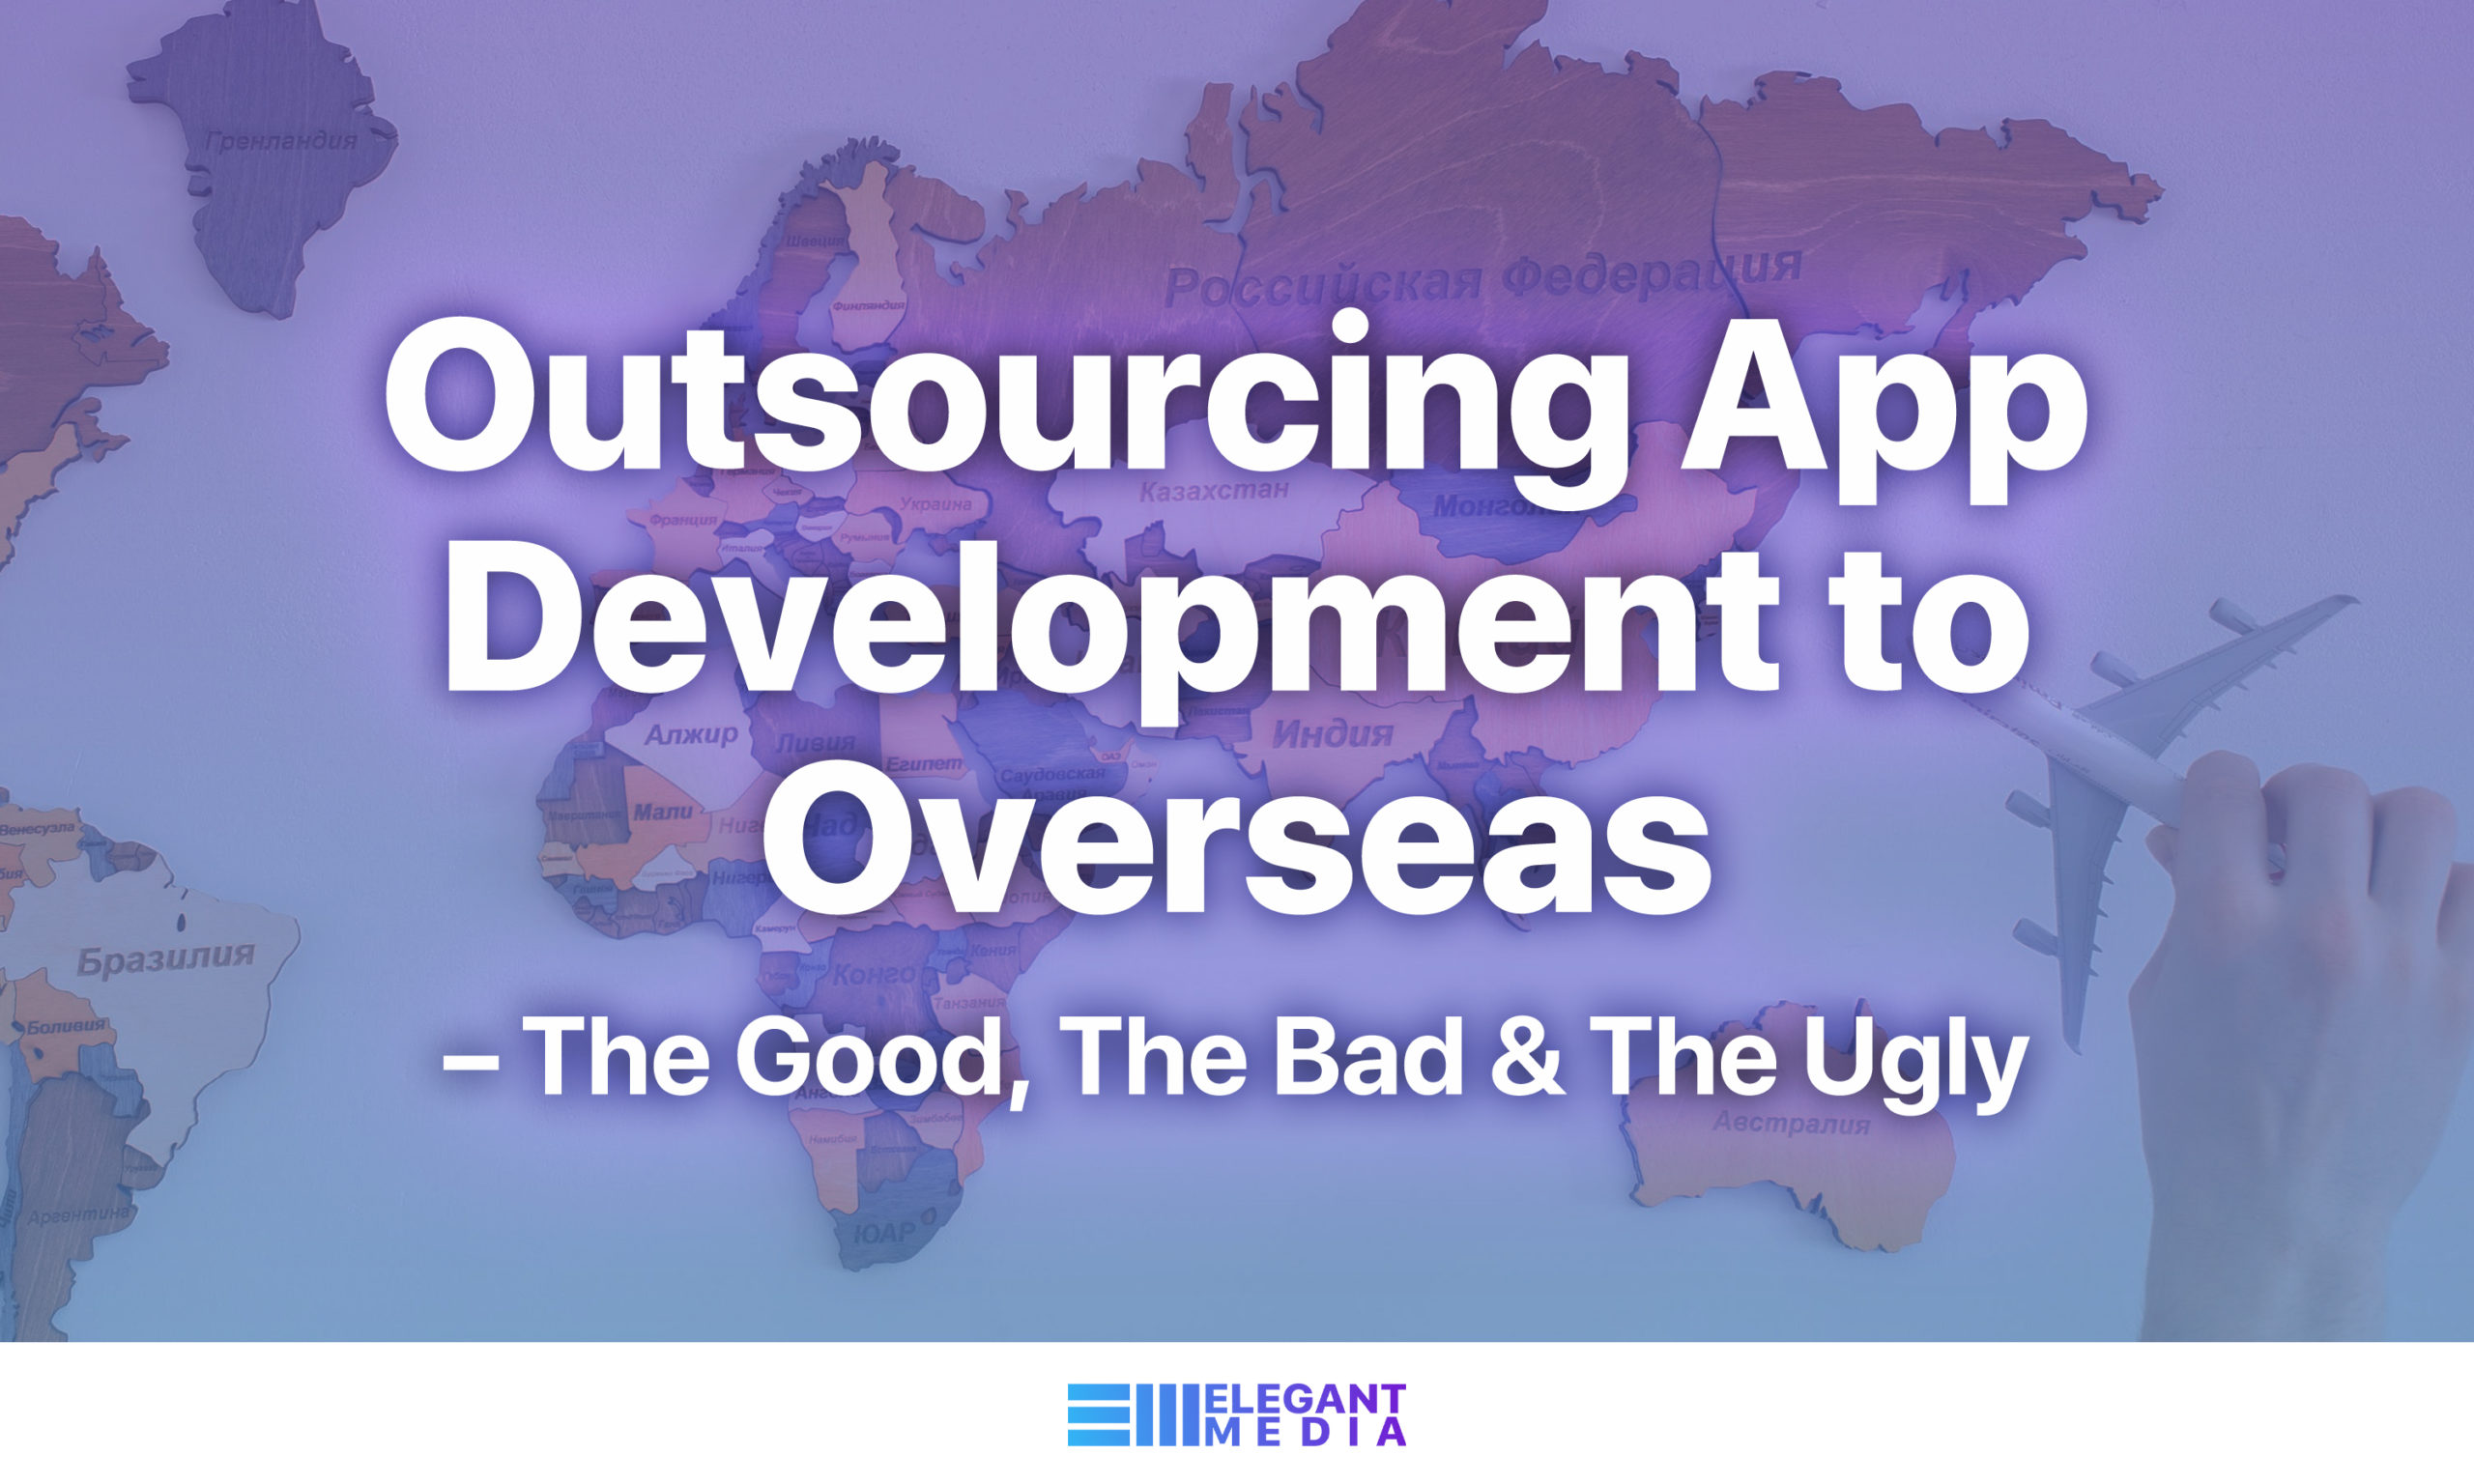 Outsourcing App Development to Overseas – The Good, The Bad & The Ugly